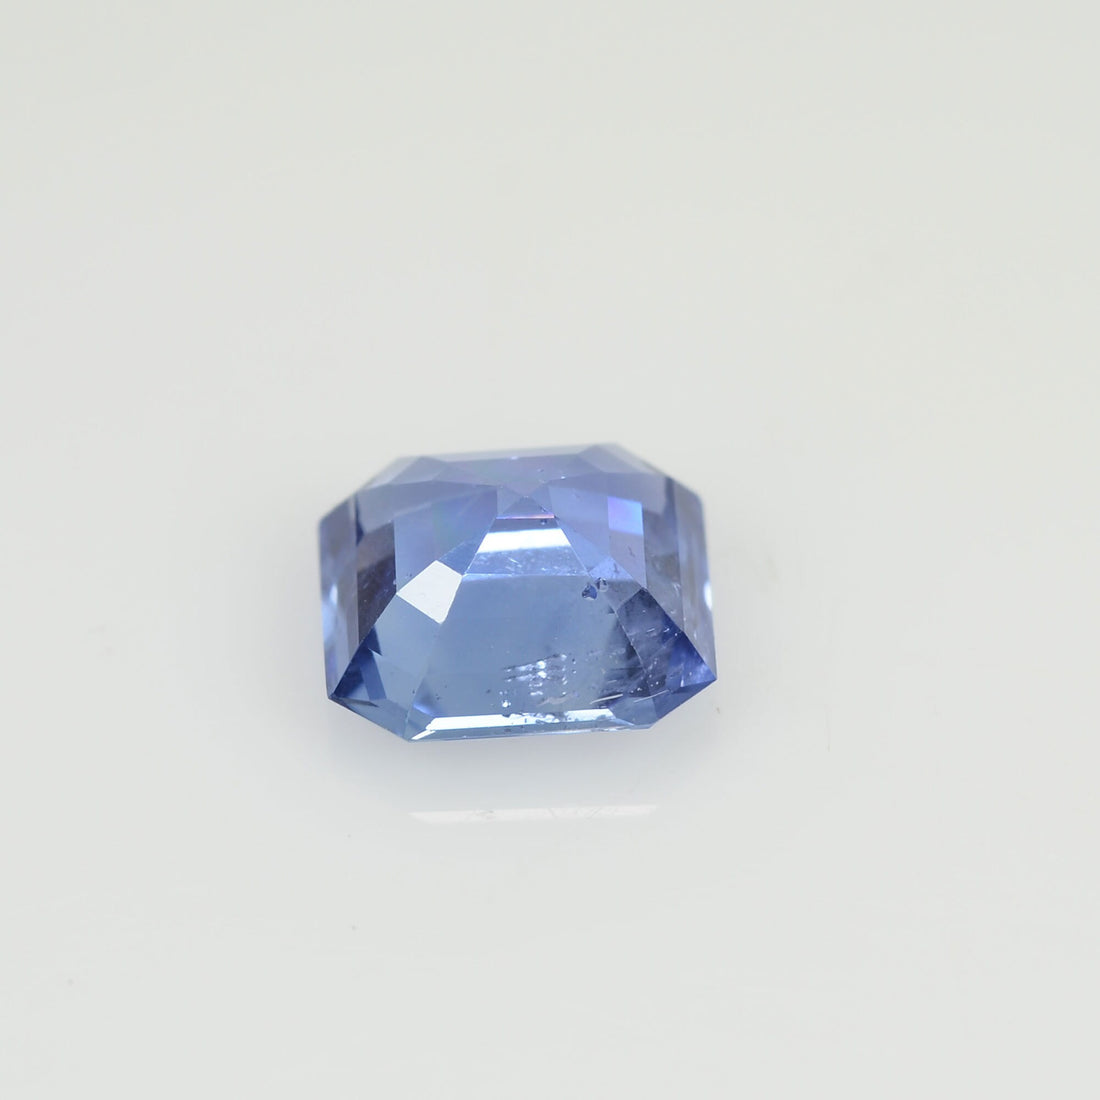 1.19 cts Unheated Natural Blue Sapphire Loose Gemstone Octagon Cut